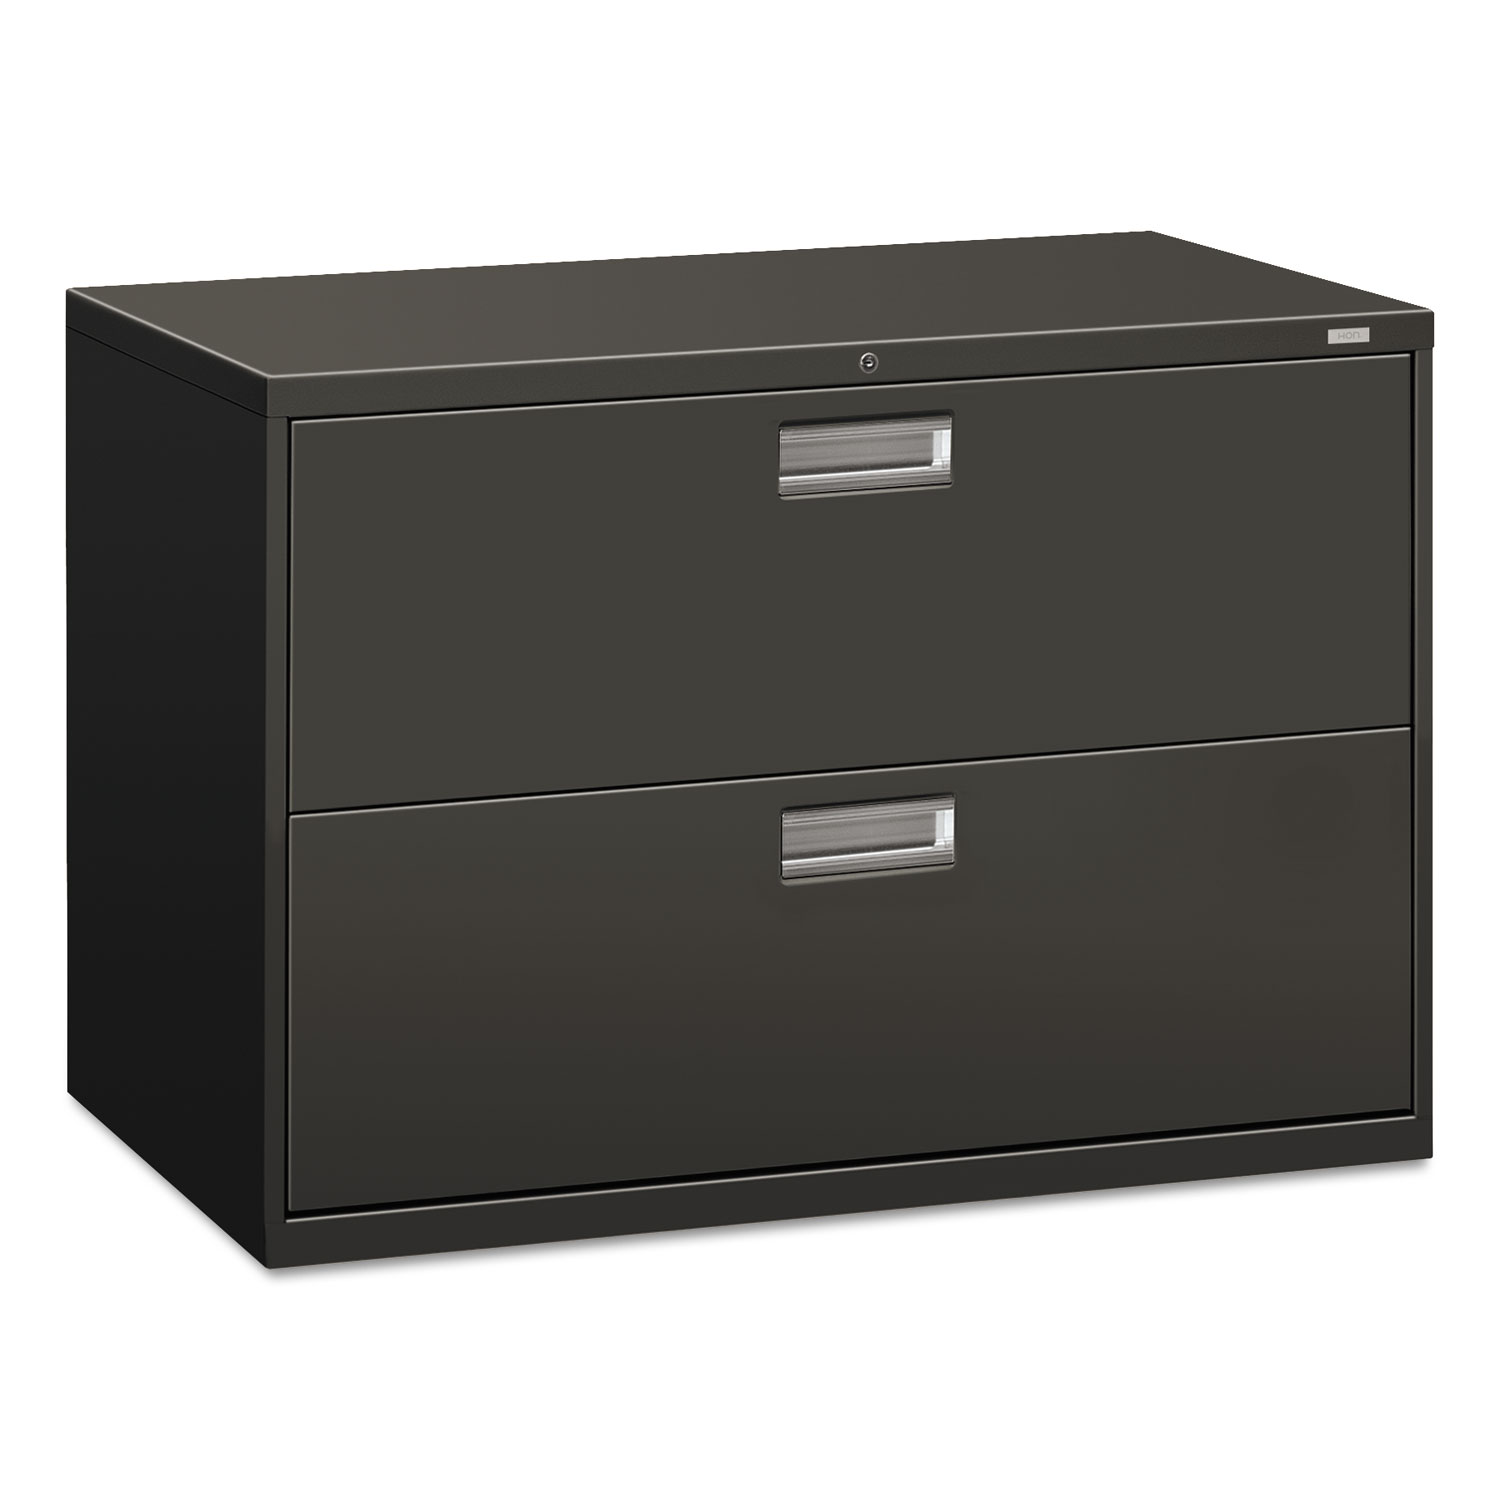  HON H692.L.S 600 Series Two-Drawer Lateral File, 42w x 18d x 28h, Charcoal (HON692LS) 